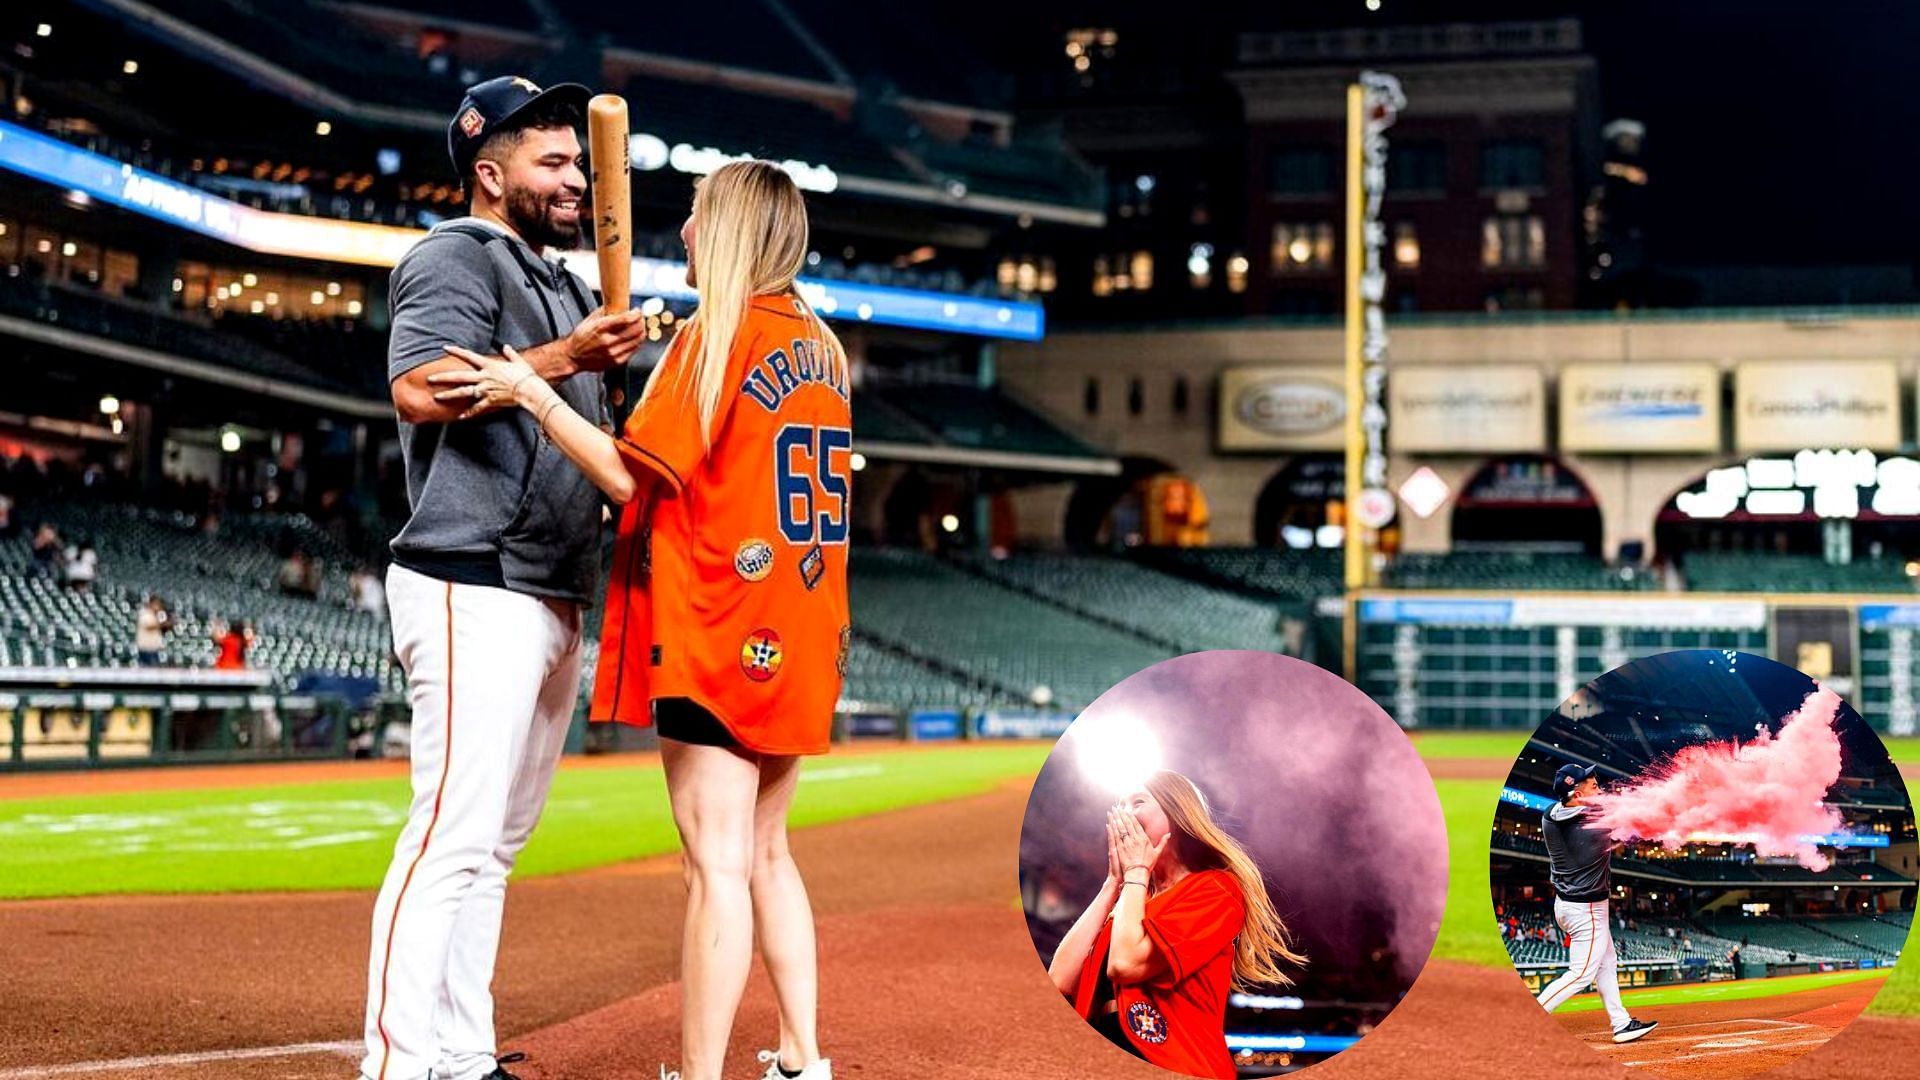 IT'S A GIRL! - Jose Urquidy steps up to the plate as his wife Estefania  pitched for a unique gender reveal after Houston Astros trump Los Angeles  Angels in series opener